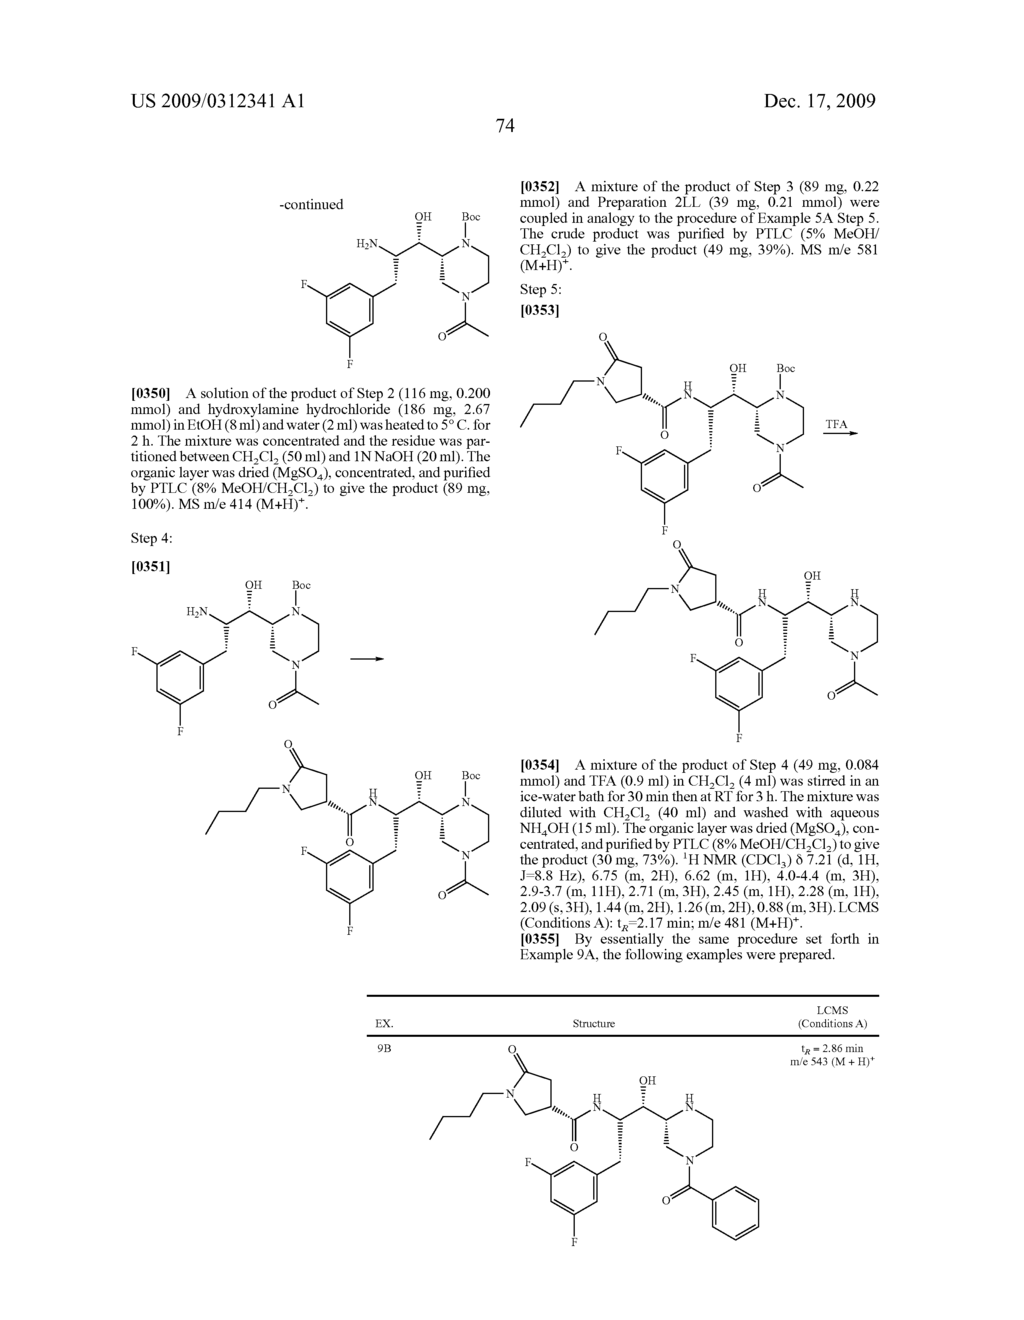 CYCLIC AMINE BACE-1 INHIBITORS HAVING A HETEROCYCLIC SUBSTITUENT - diagram, schematic, and image 75